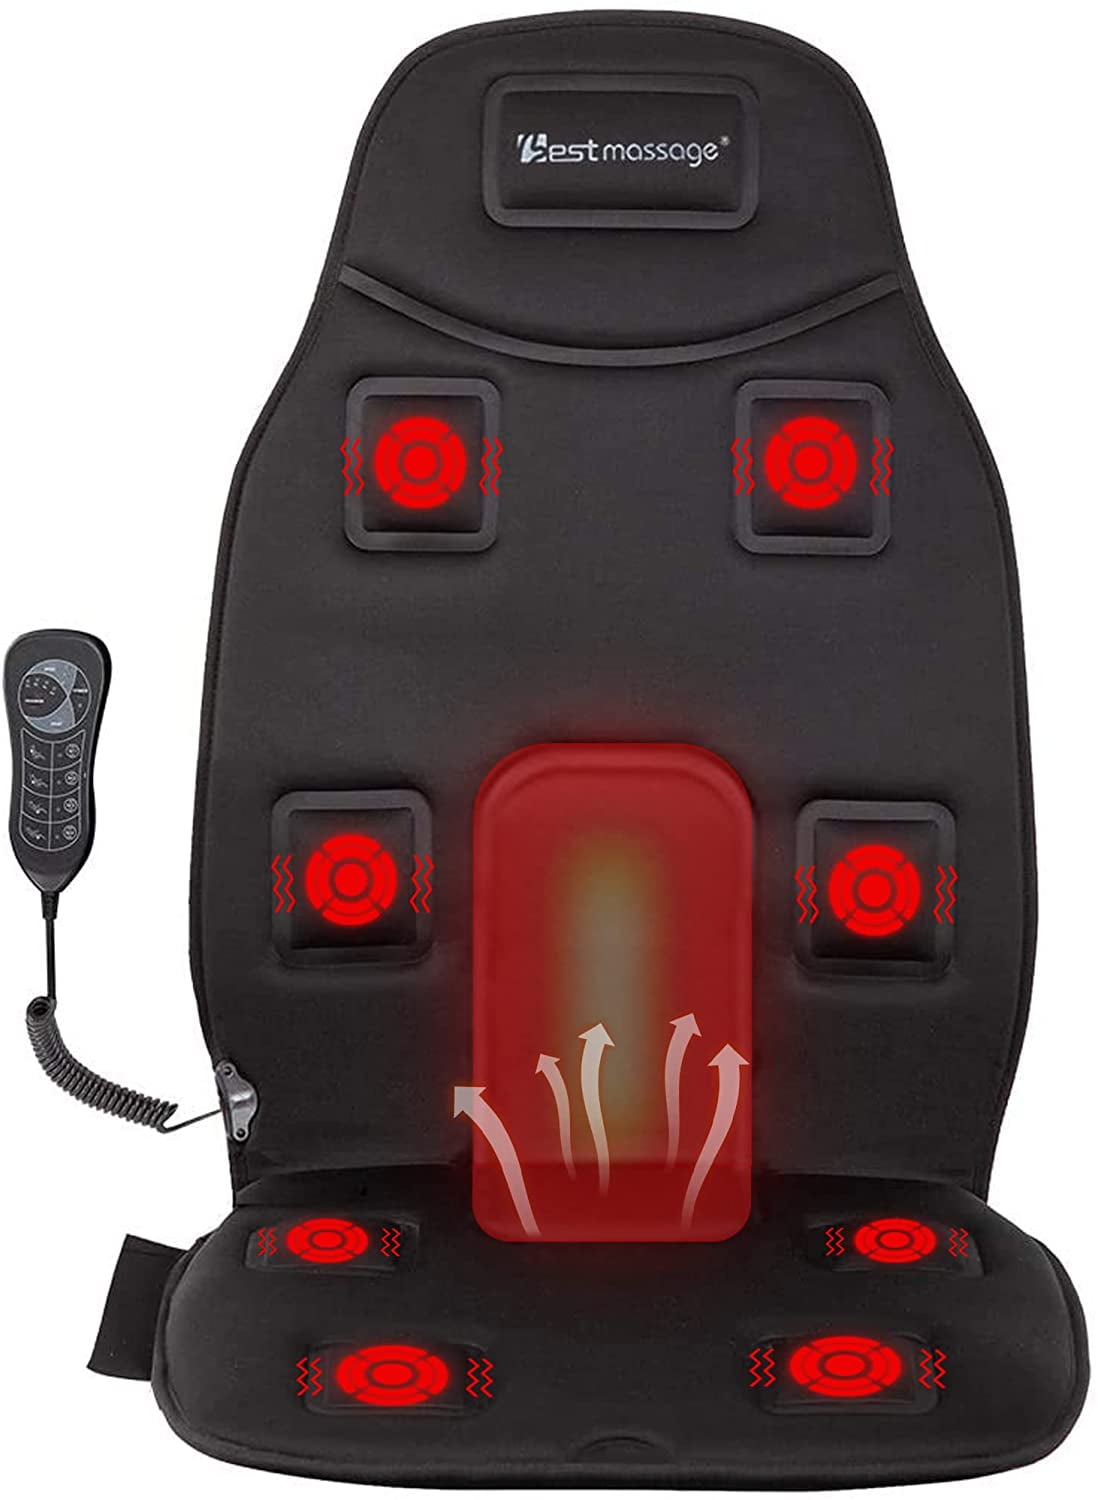 Seat Massager with Heat, Vibrating Back Massager for Chair Massage Cushion,  8 Vibrating Nodes to Rel…See more Seat Massager with Heat, Vibrating Back